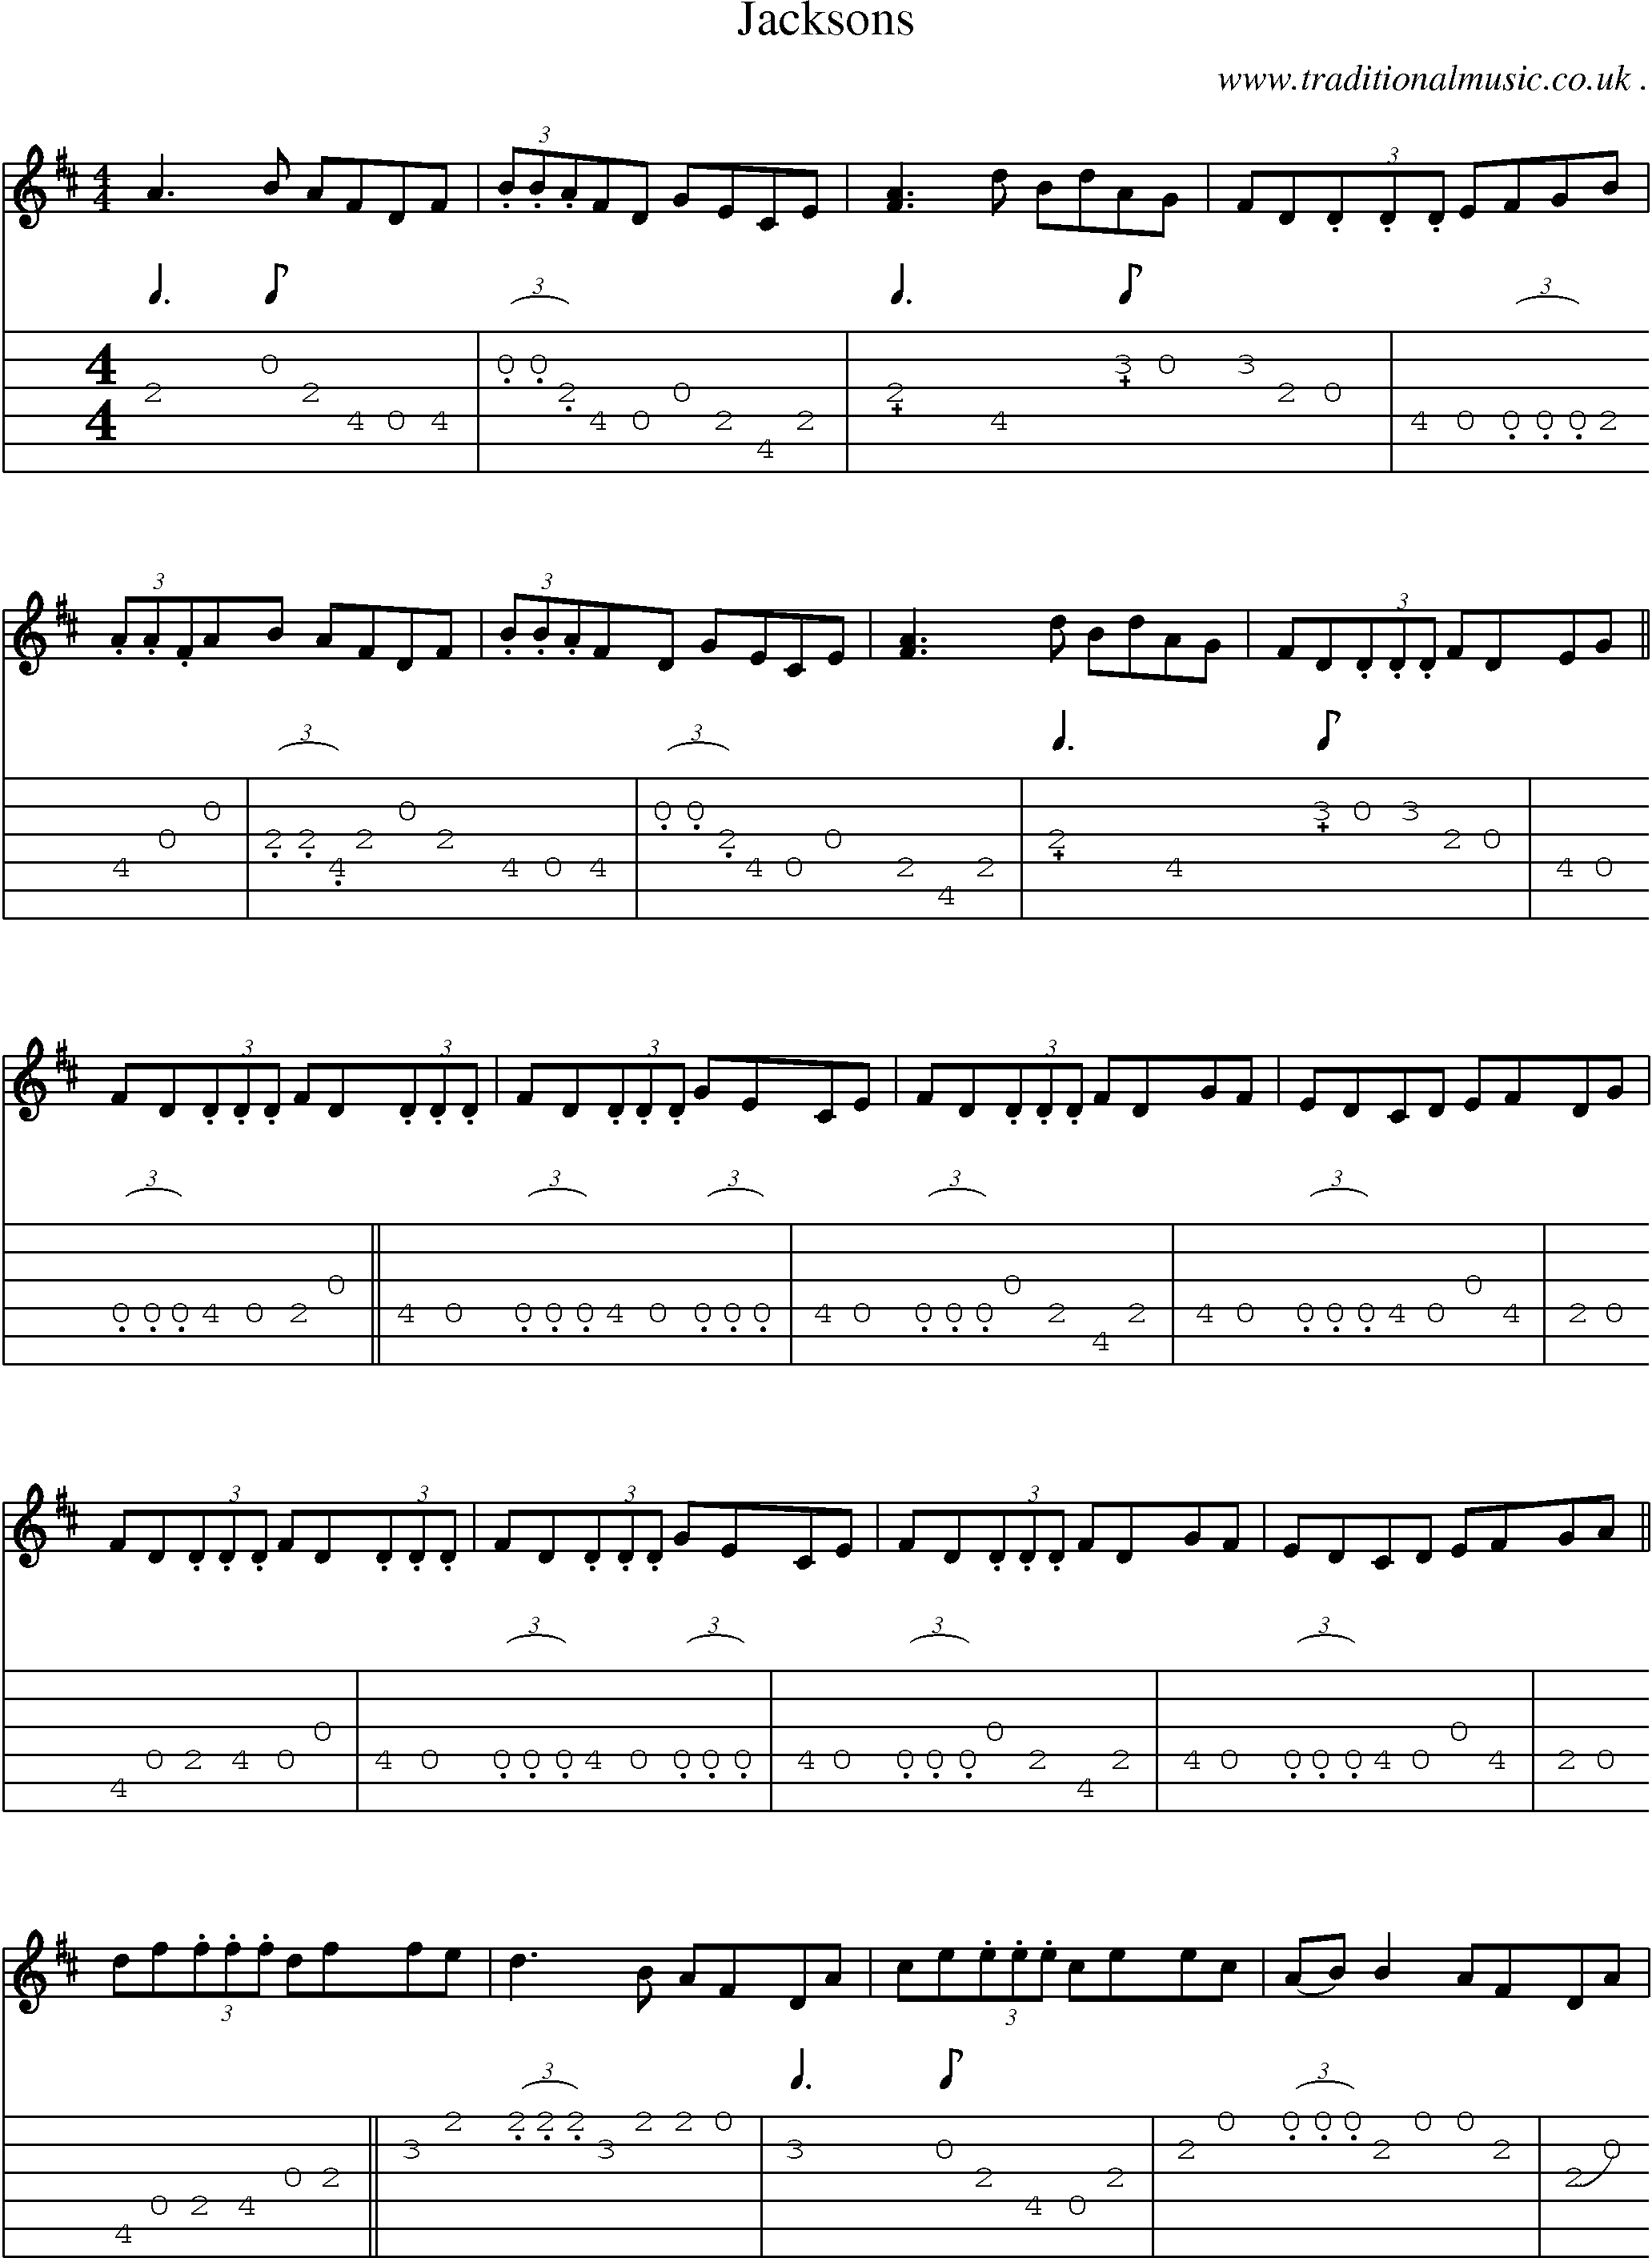 Sheet-Music and Guitar Tabs for Jacksons